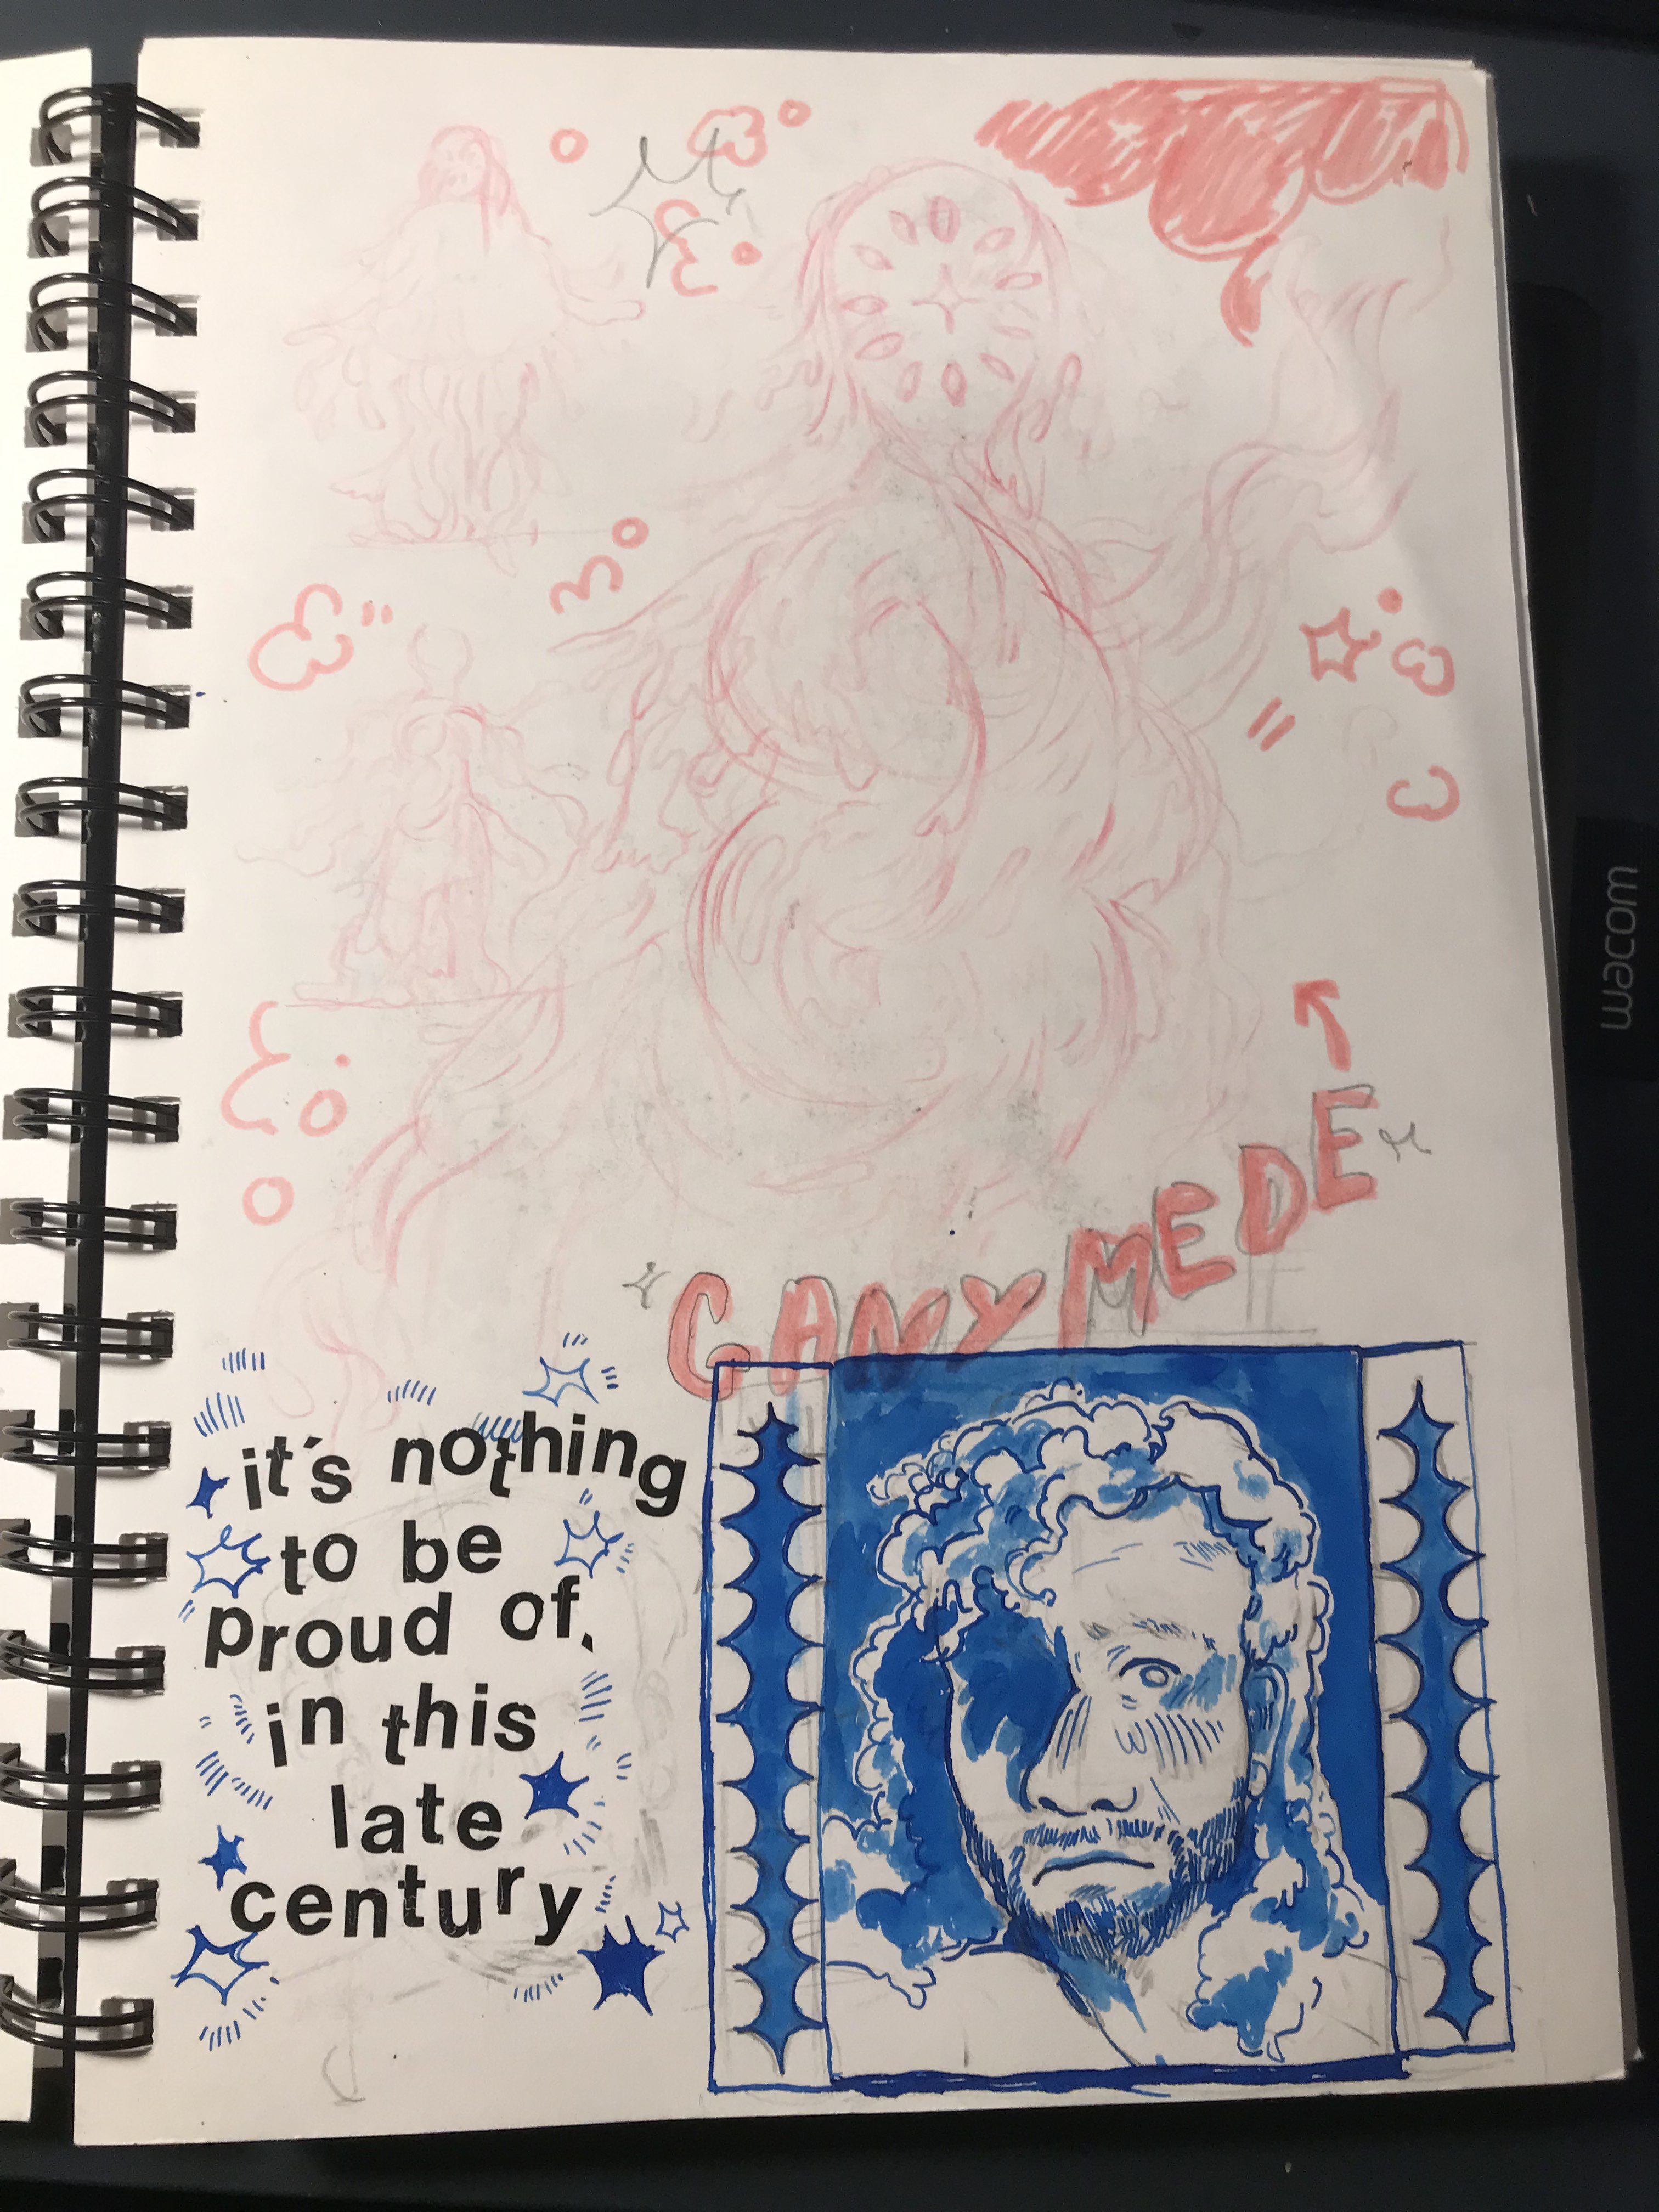 A photo of a sketchbook page, with a drawing of an alien figure in light pink pencil, and below it, a headshot of a man with heavy shading in blue ink, with a small border.